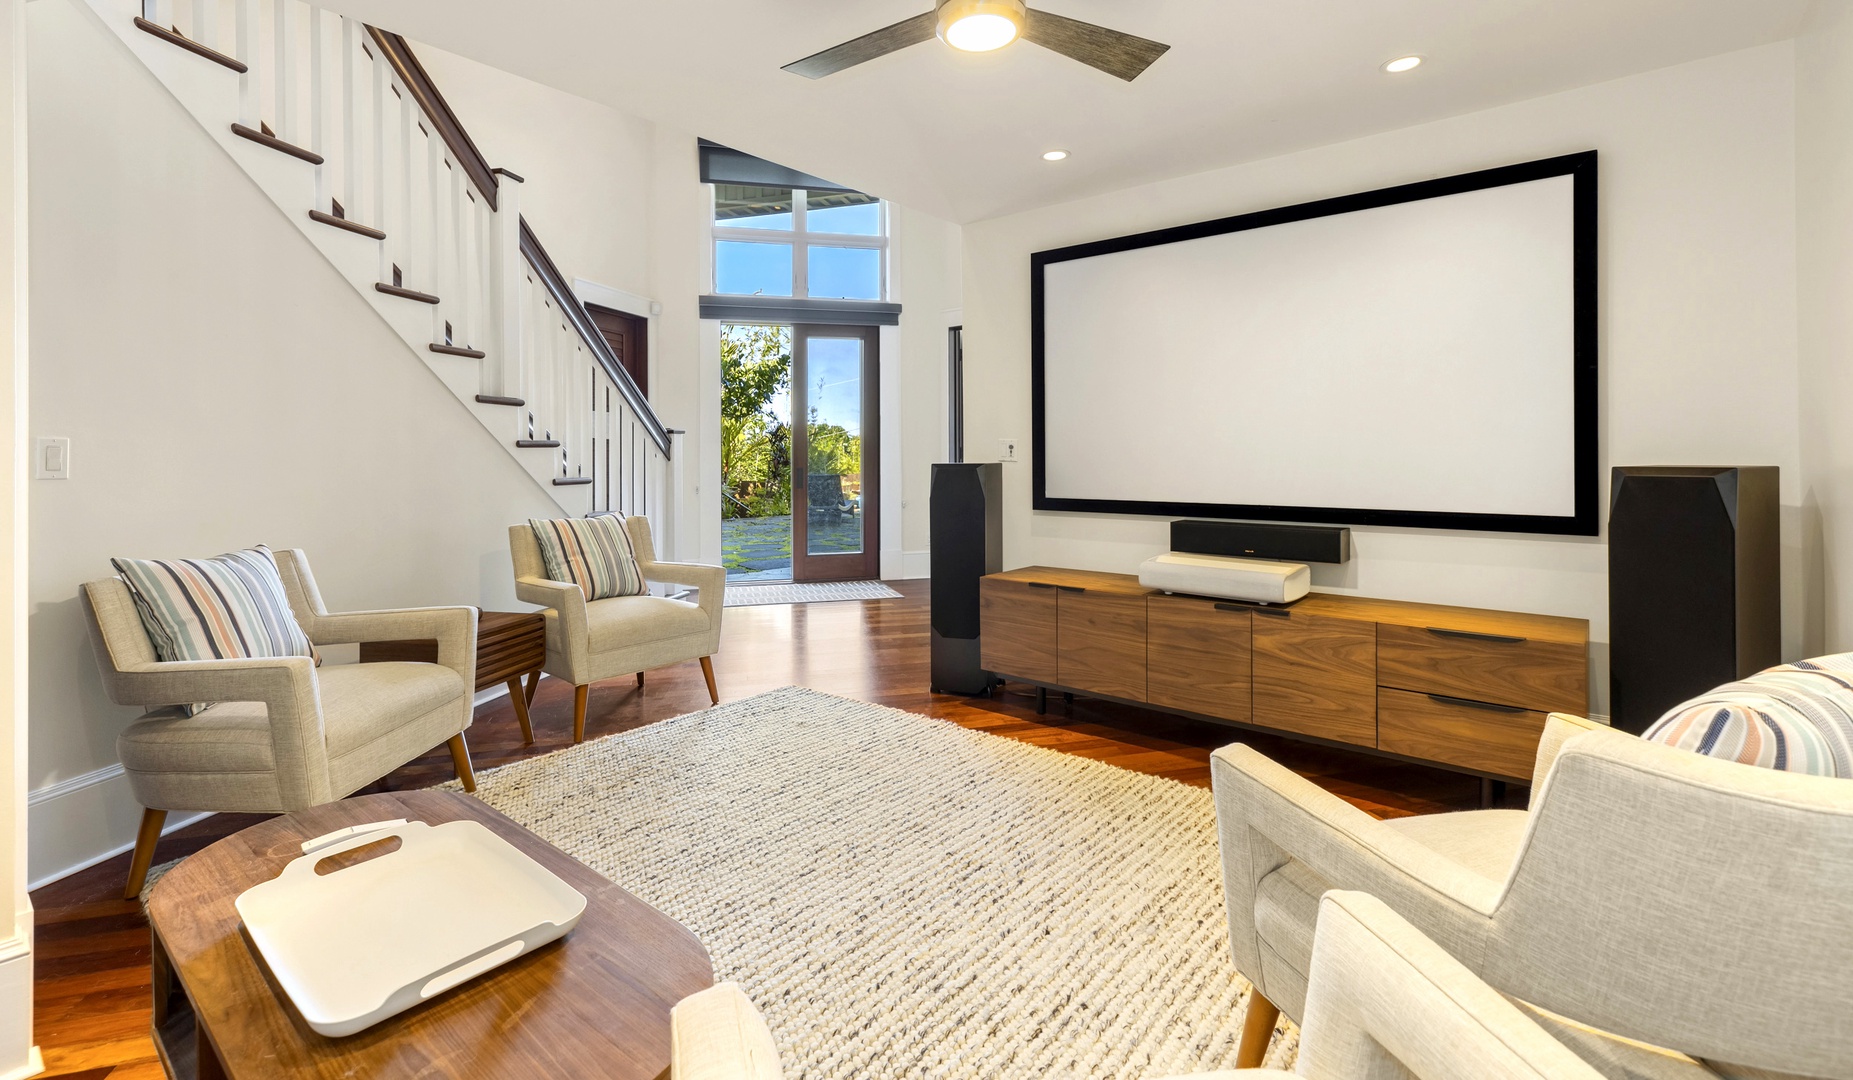 Kailua Vacation Rentals, Lanikai Villa* - Head down the stairs and you'll also find a den with a large-screen TV and plenty of seating - Ideal for a movie night!